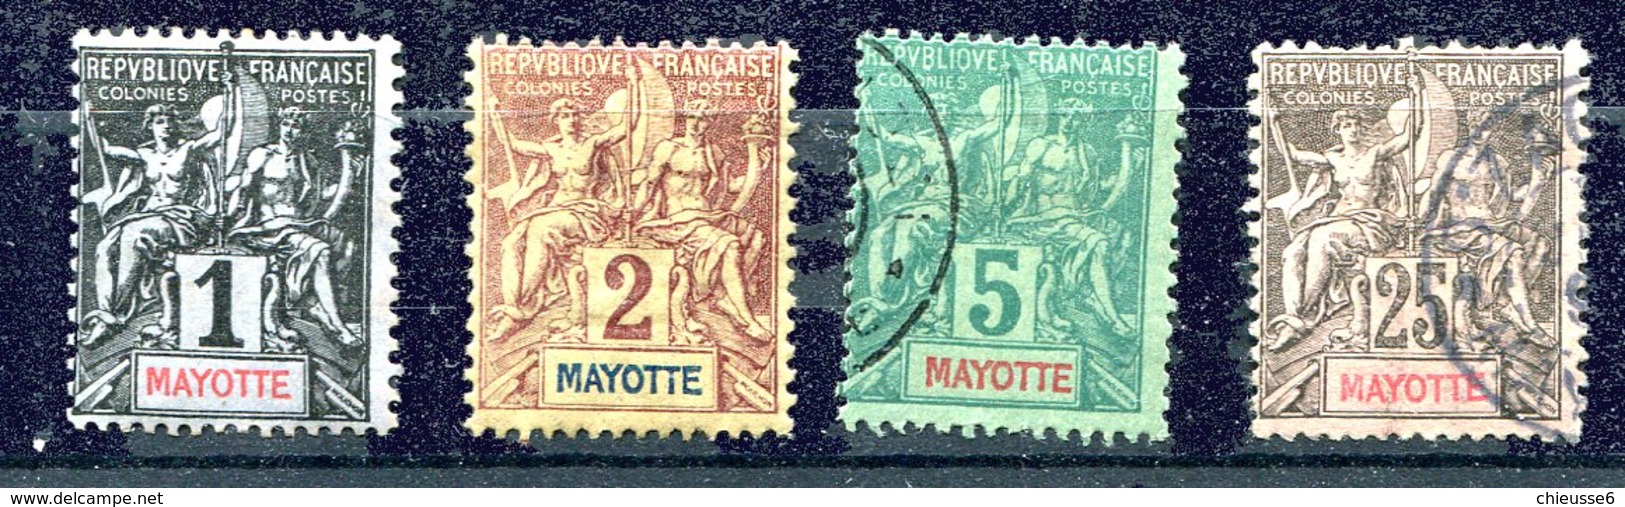 Mayotte *, Ch, (*)  1 - 2 - 4 - 25 - Used Stamps